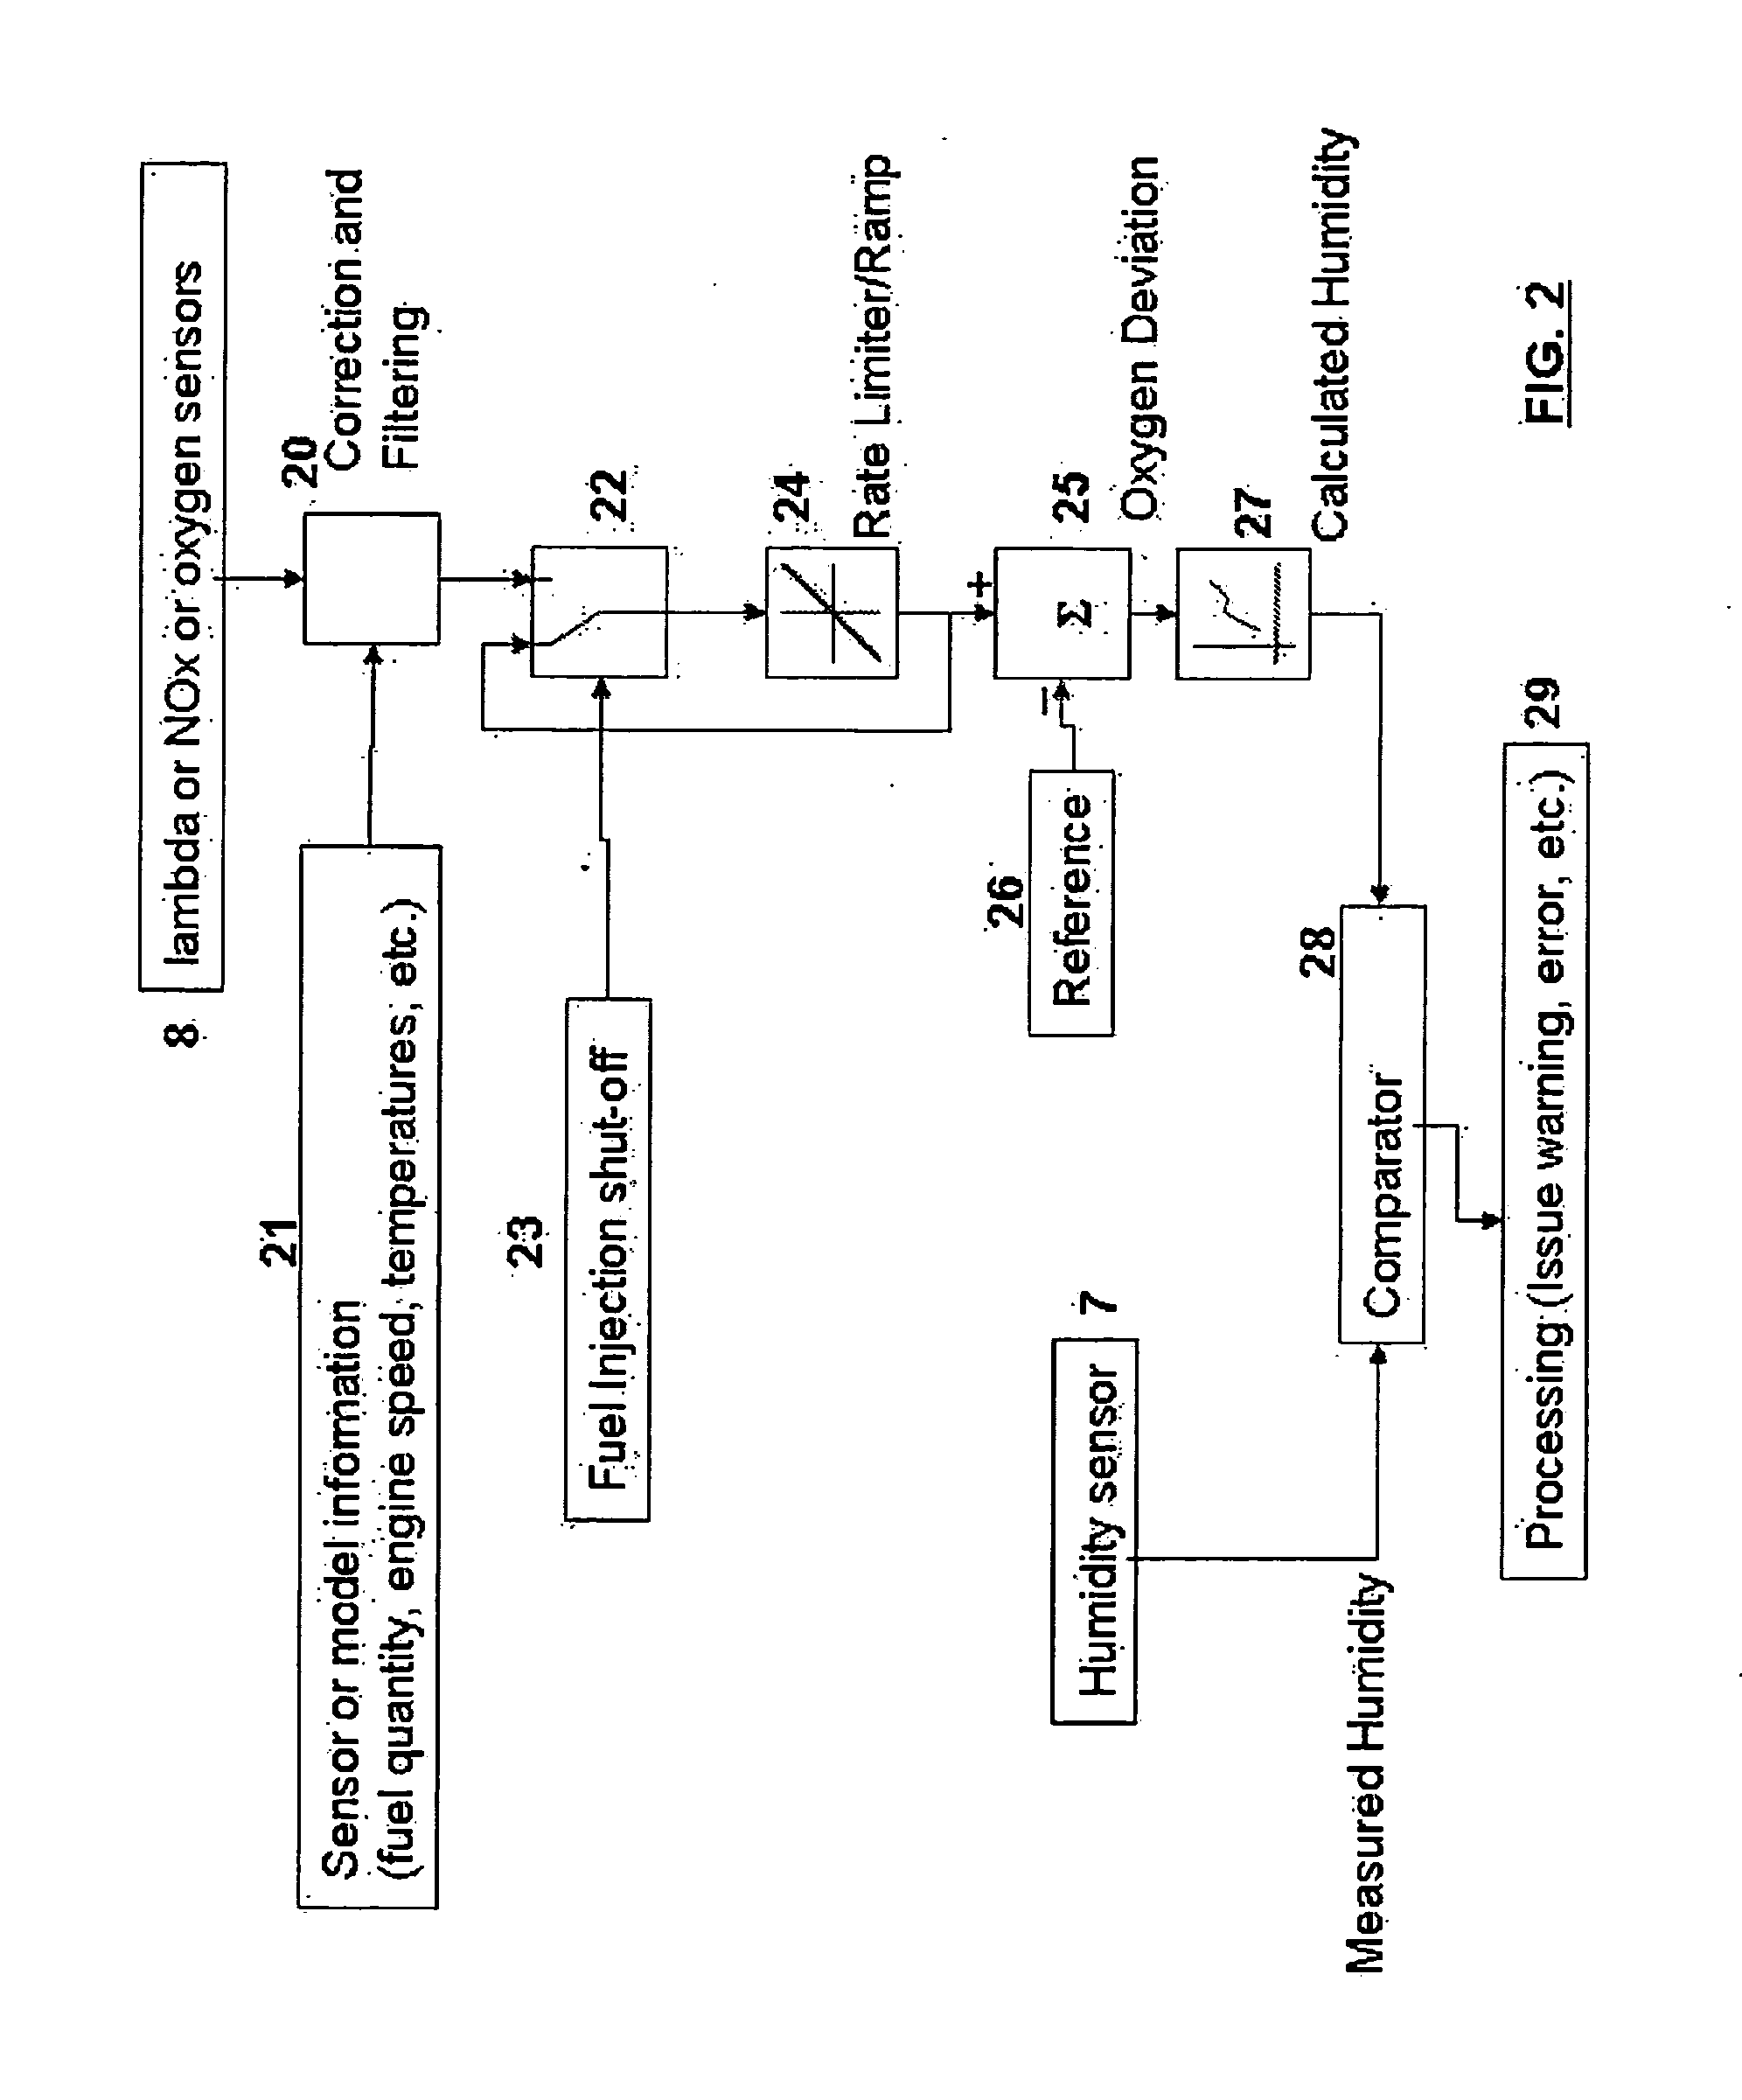 Method and device for monitoring a humidity sensor in a combustion engine, using oxygen measurement of other sensors in the engine, such as nox, lambda and/or oxygen sensors